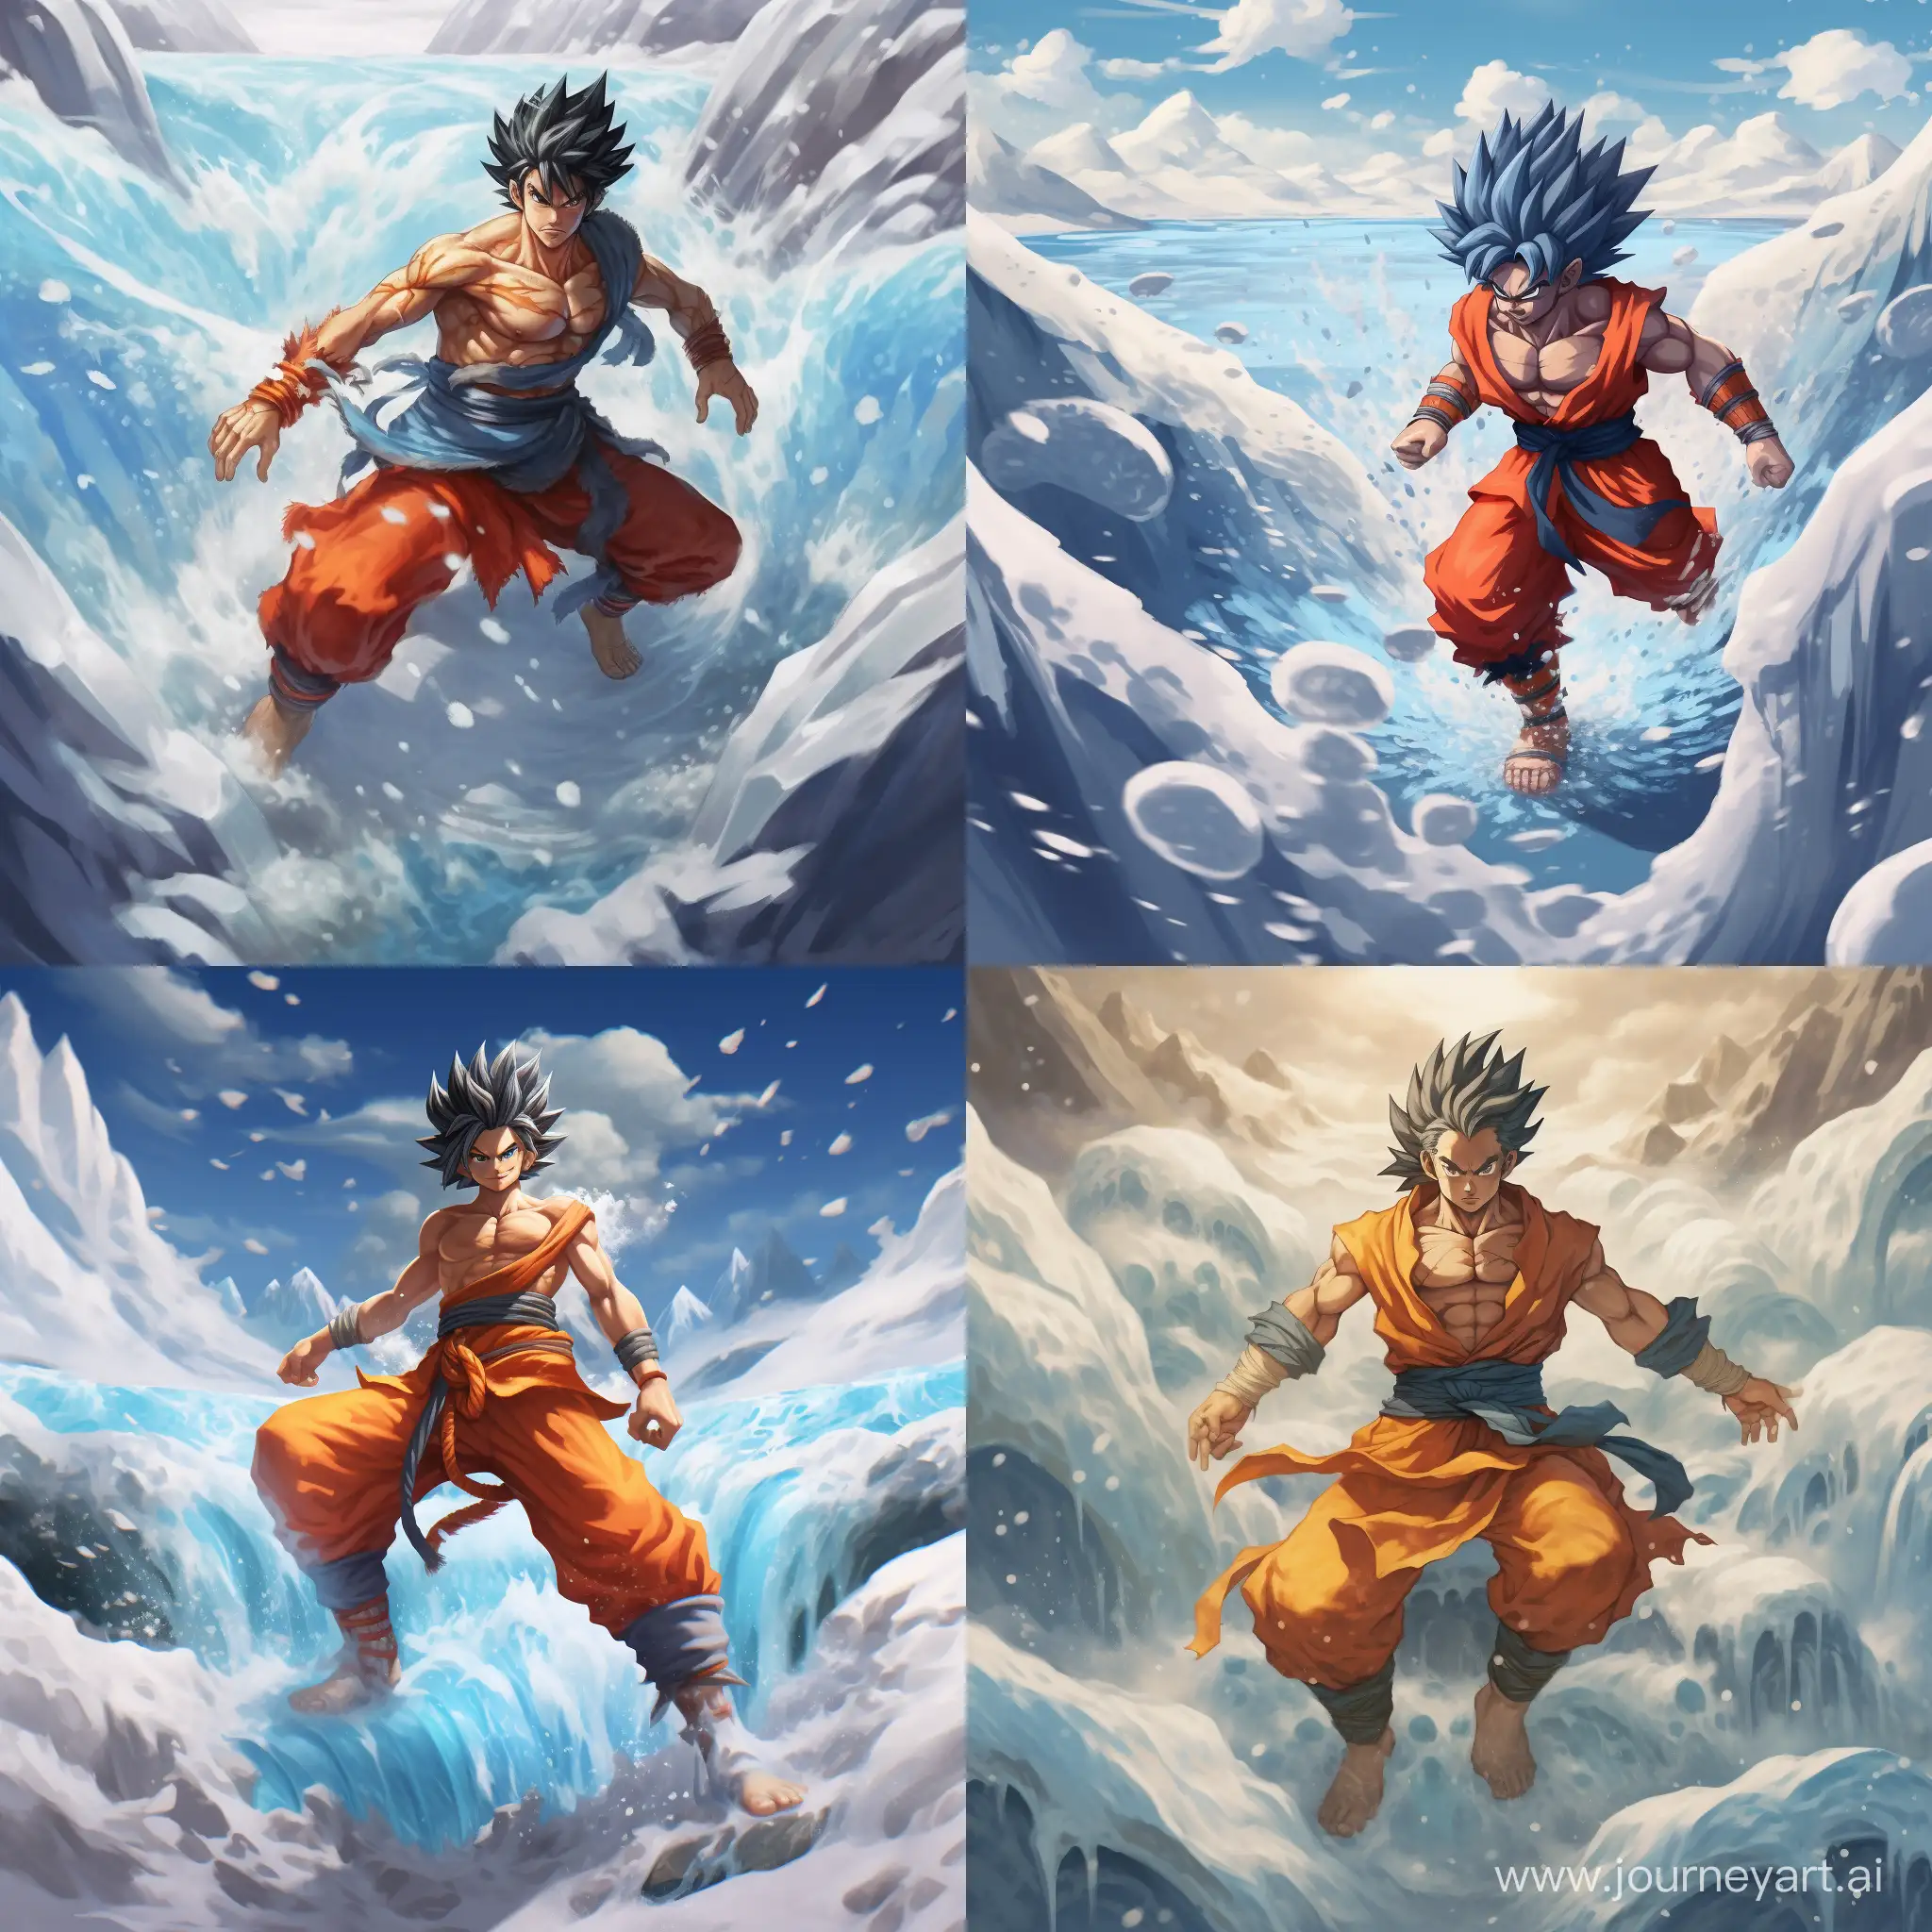 Epic-Battle-Son-Goku-Shatters-Ice-River-Amidst-the-Clouds